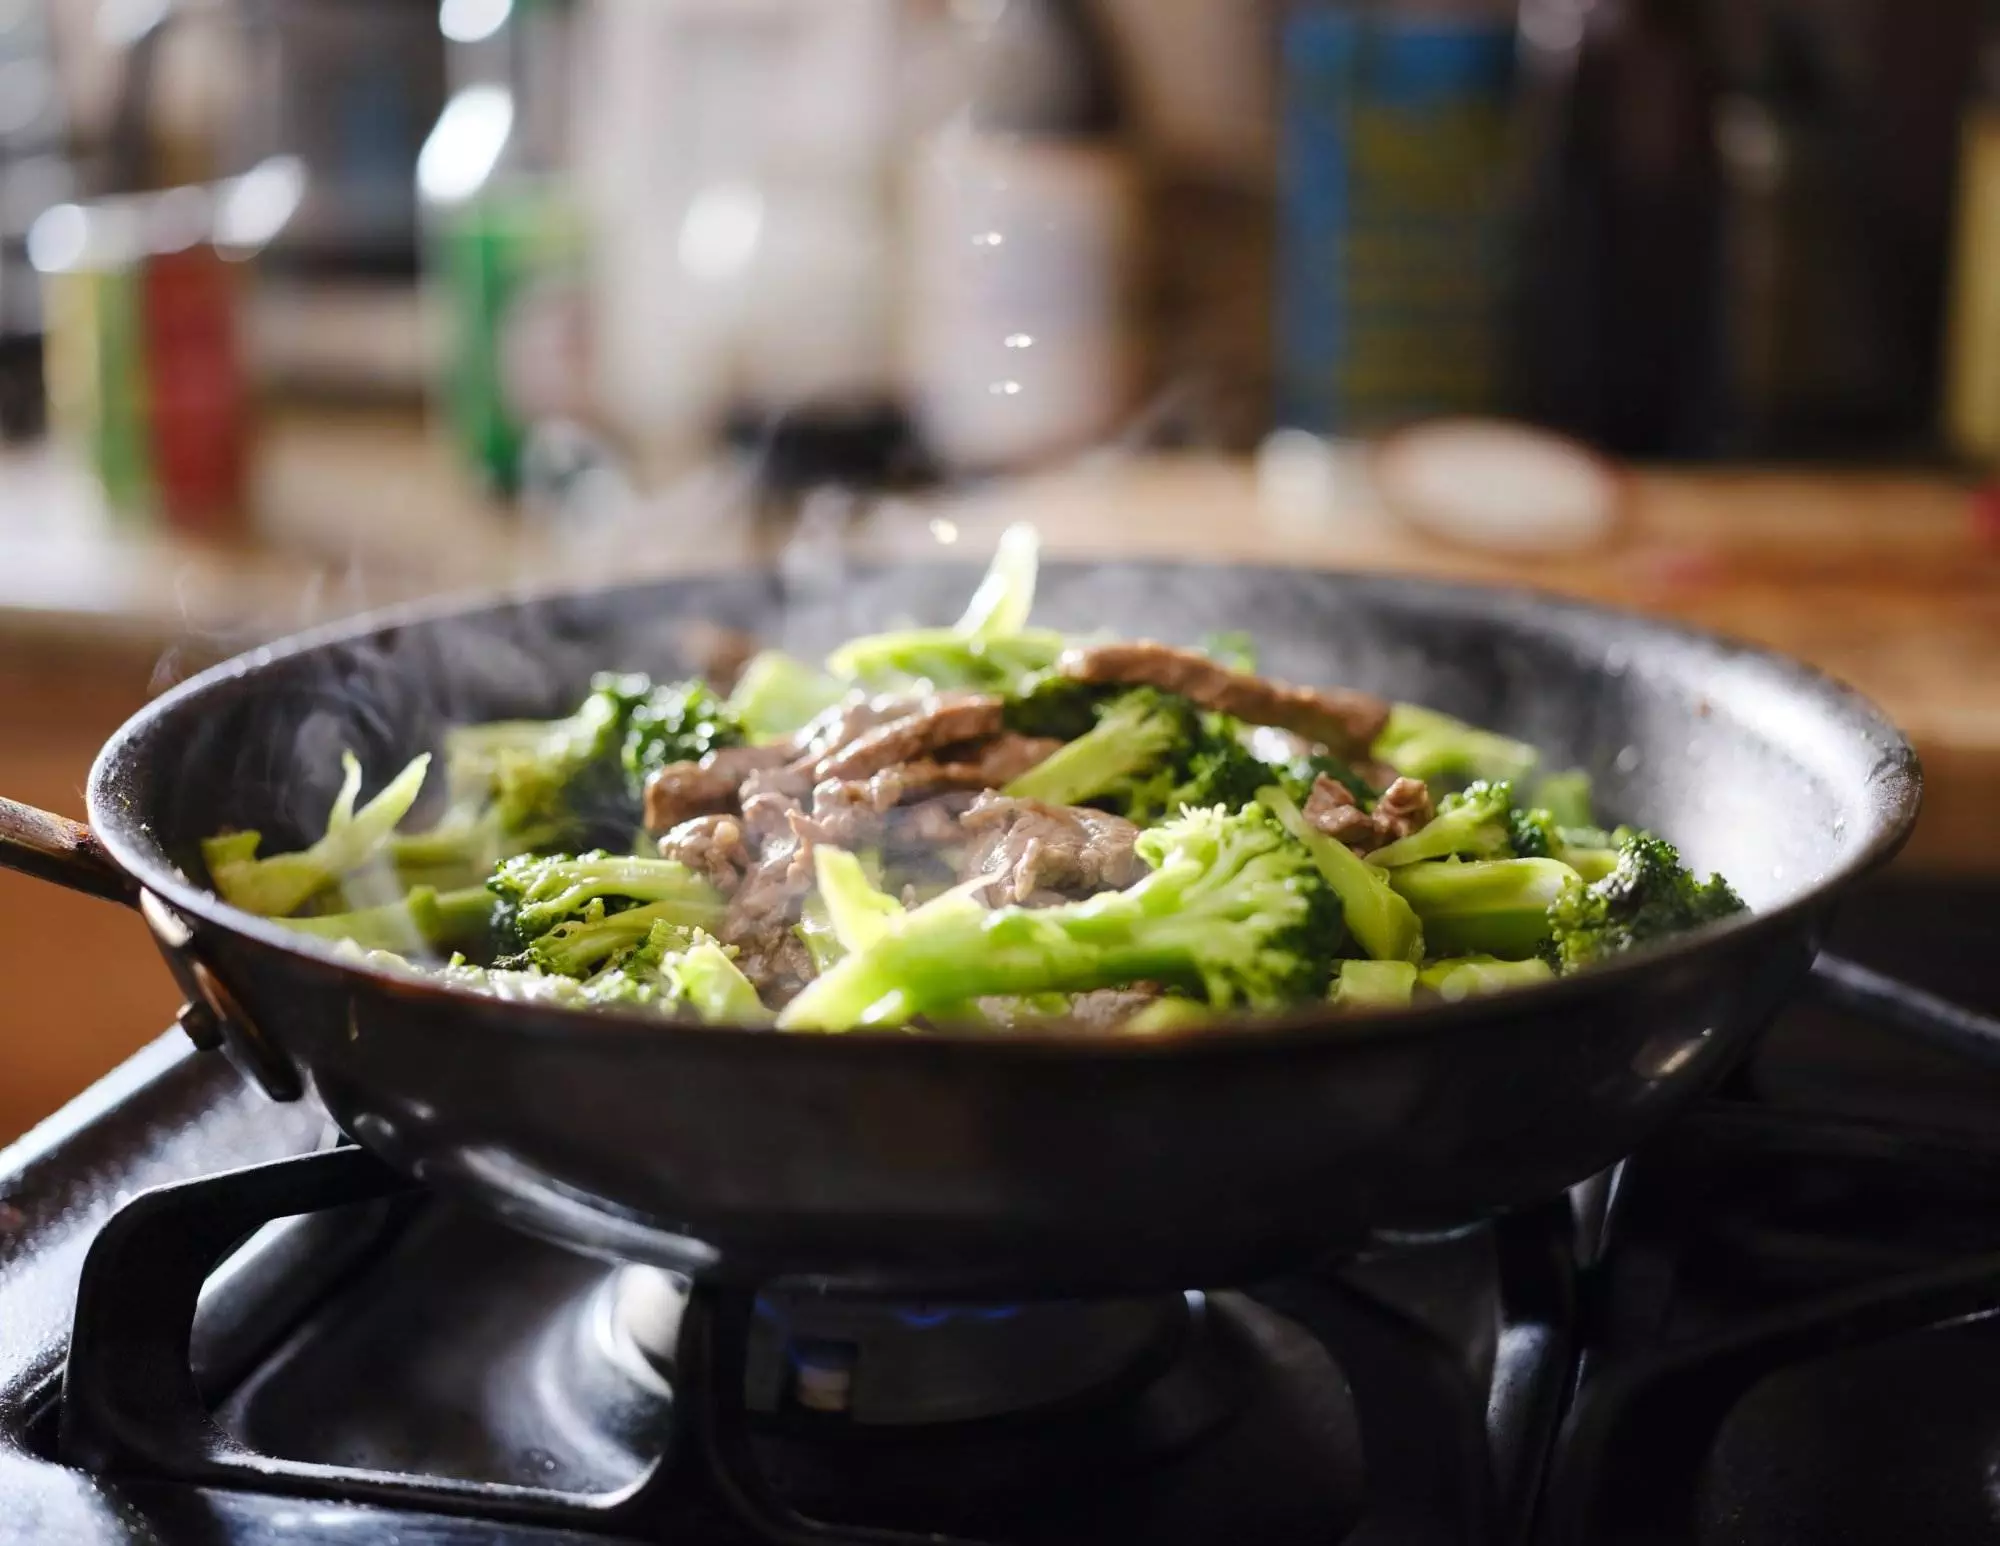 Stir-fried beef and broccoli in skillet.